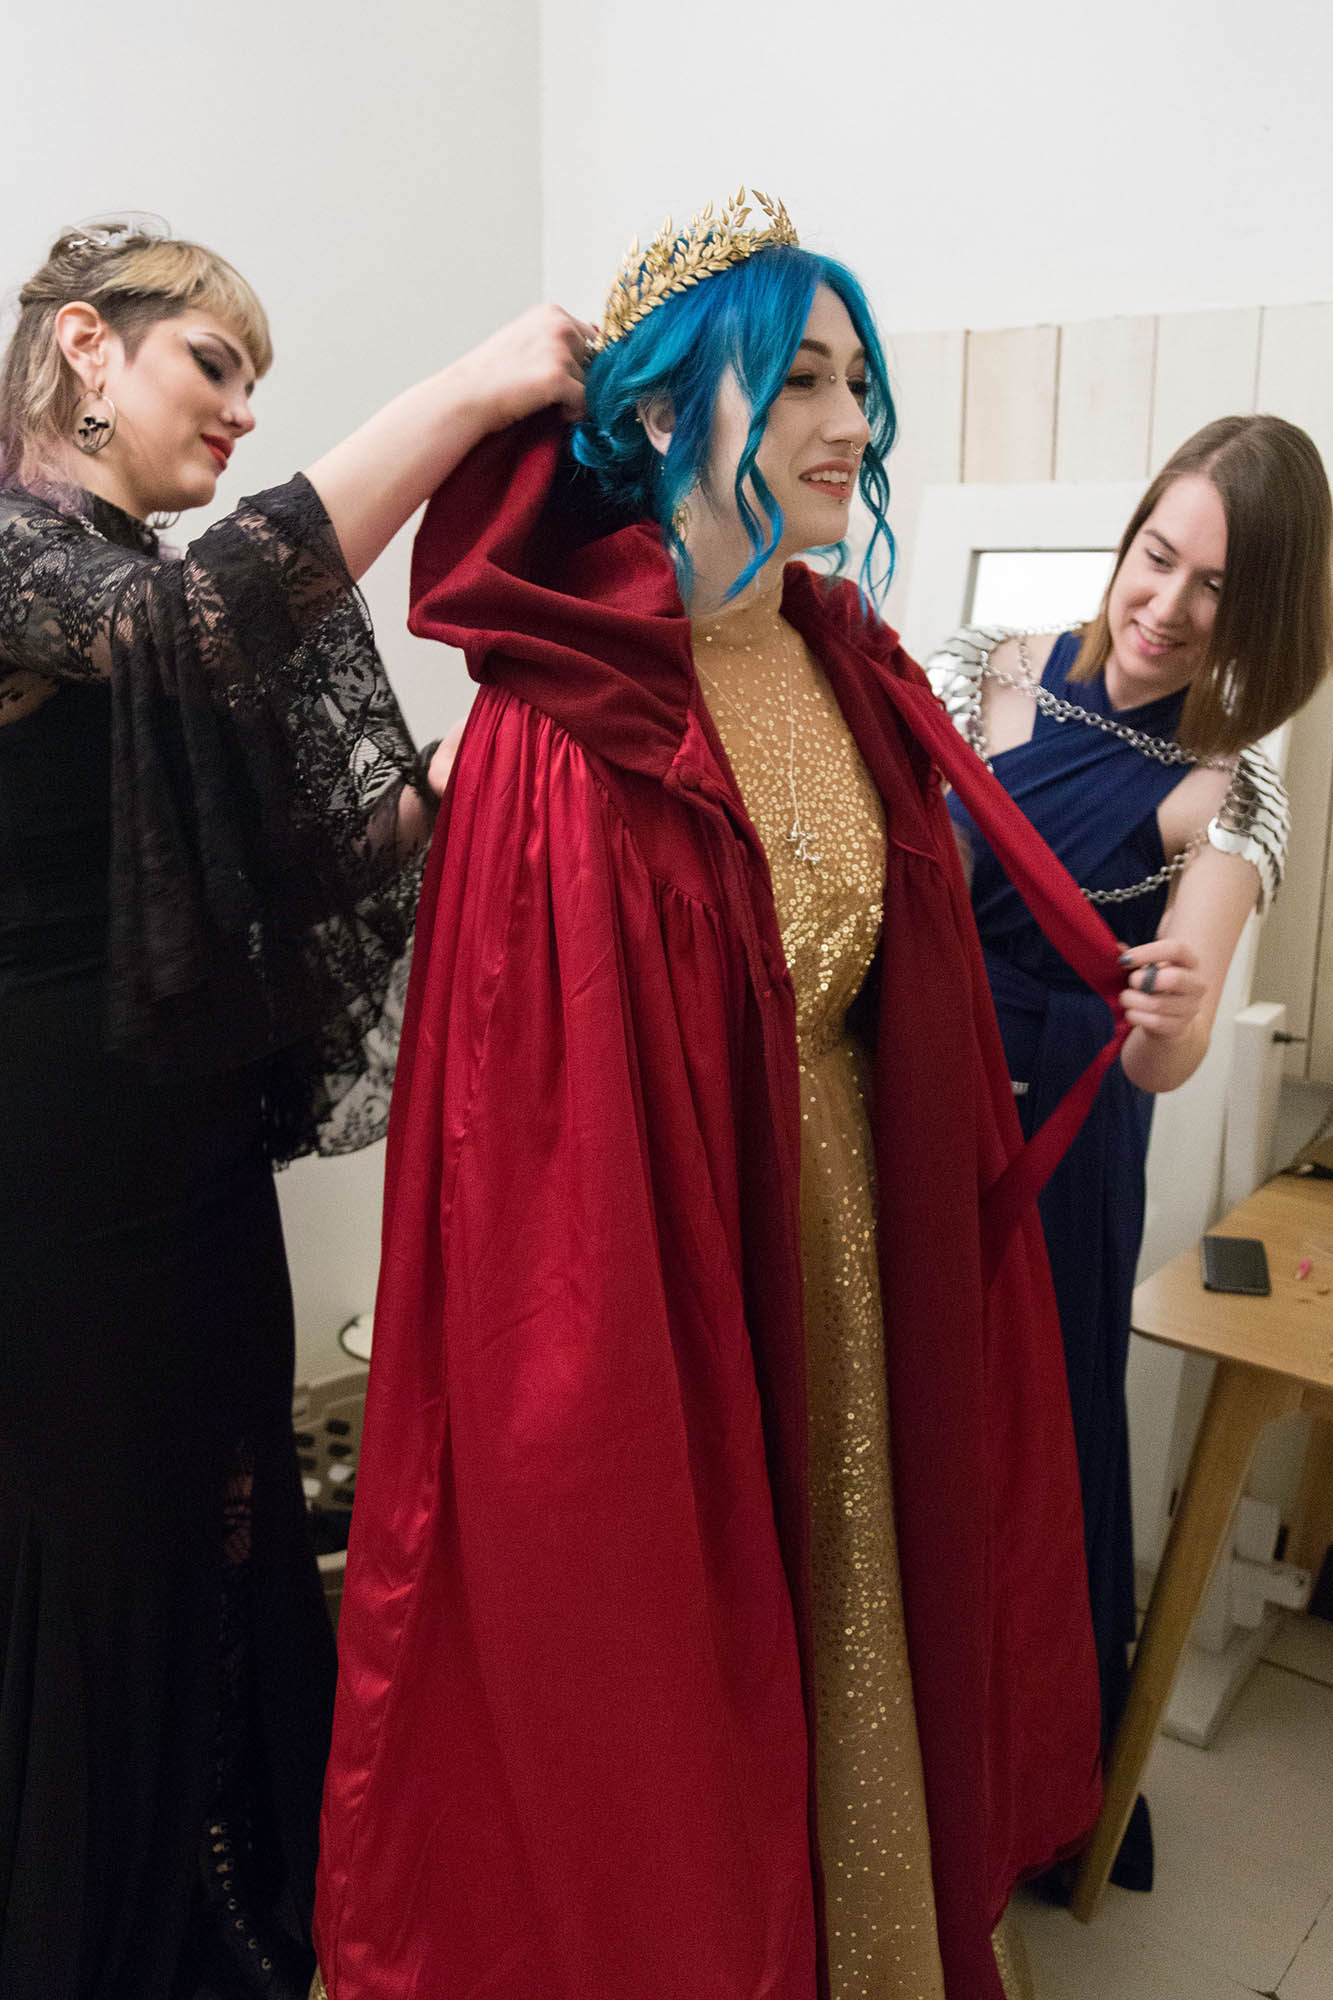 Bridesmaids help Bride put on Red Wedding Cape and Crown